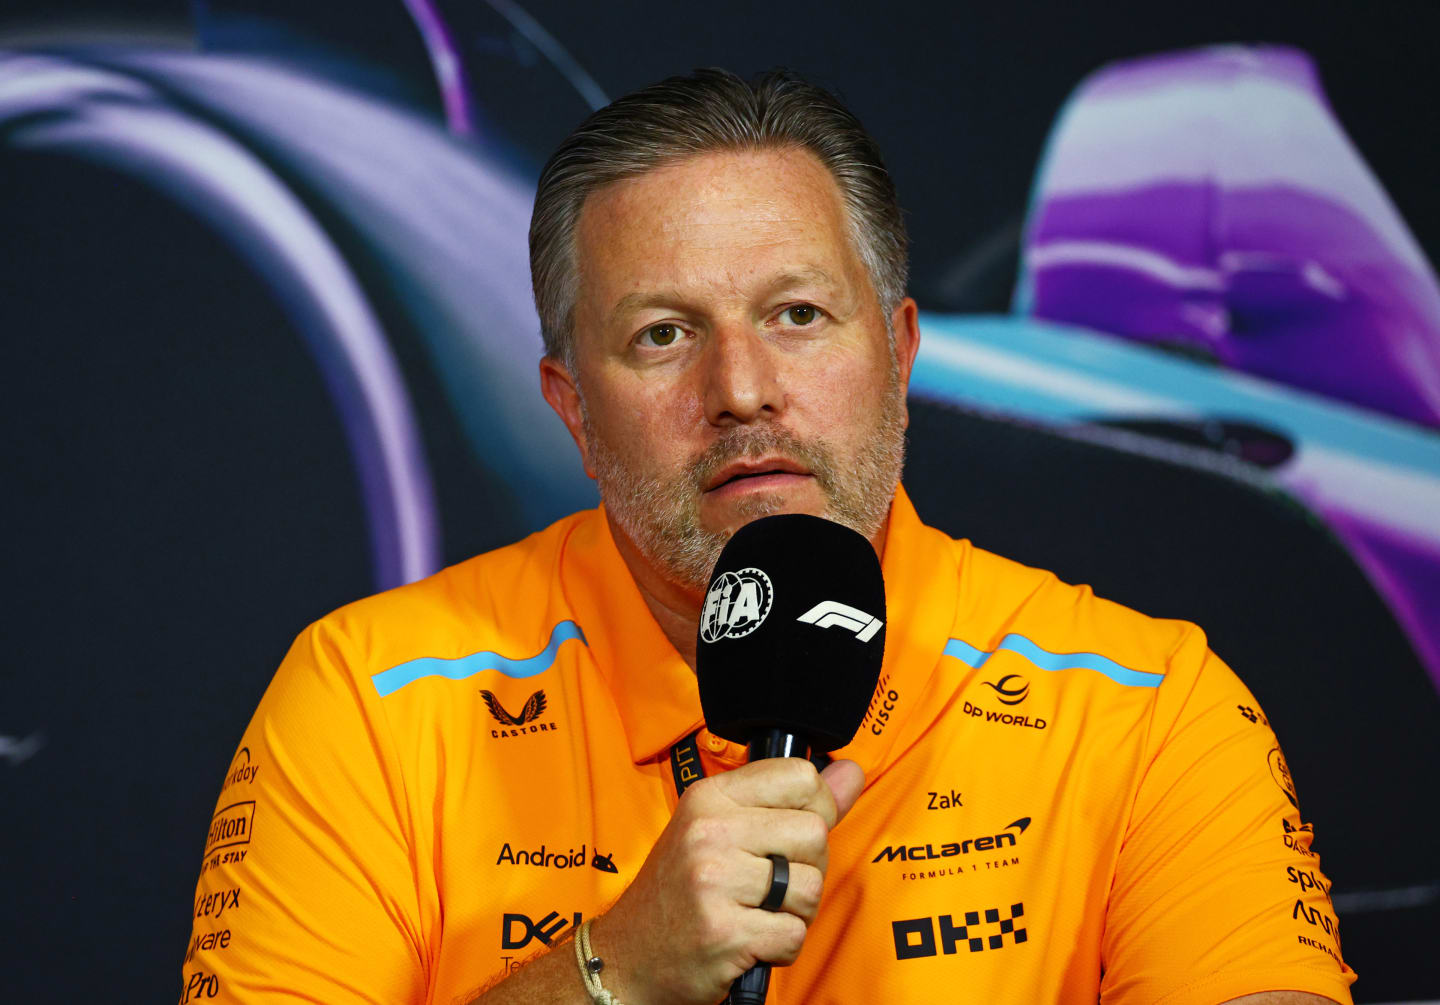 MIAMI, FLORIDA - MAY 03: McLaren Chief Executive Officer Zak Brown attends the Team Principals Press Conference after practice ahead of the F1 Grand Prix of Miami at Miami International Autodrome on May 03, 2024 in Miami, Florida. (Photo by Clive Rose/Getty Images)